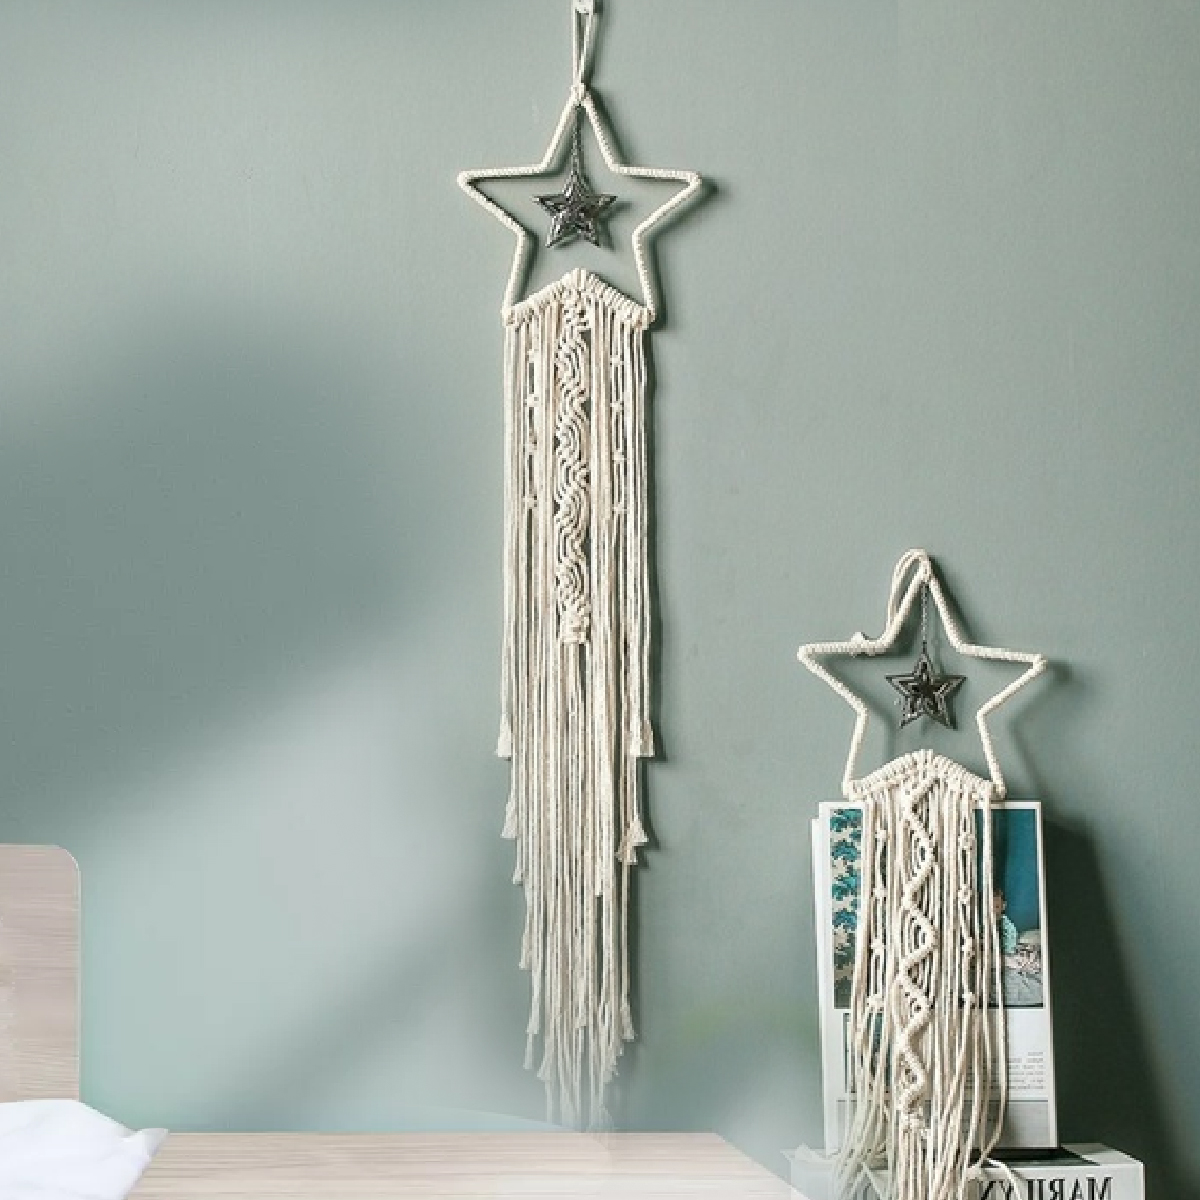 Hand-woven-Tassel-Pendant-Girl-Baby-Room-Wall-Hanging-Decoration-Bohemia-Style-for-Home-Decor-Access-1808278-8